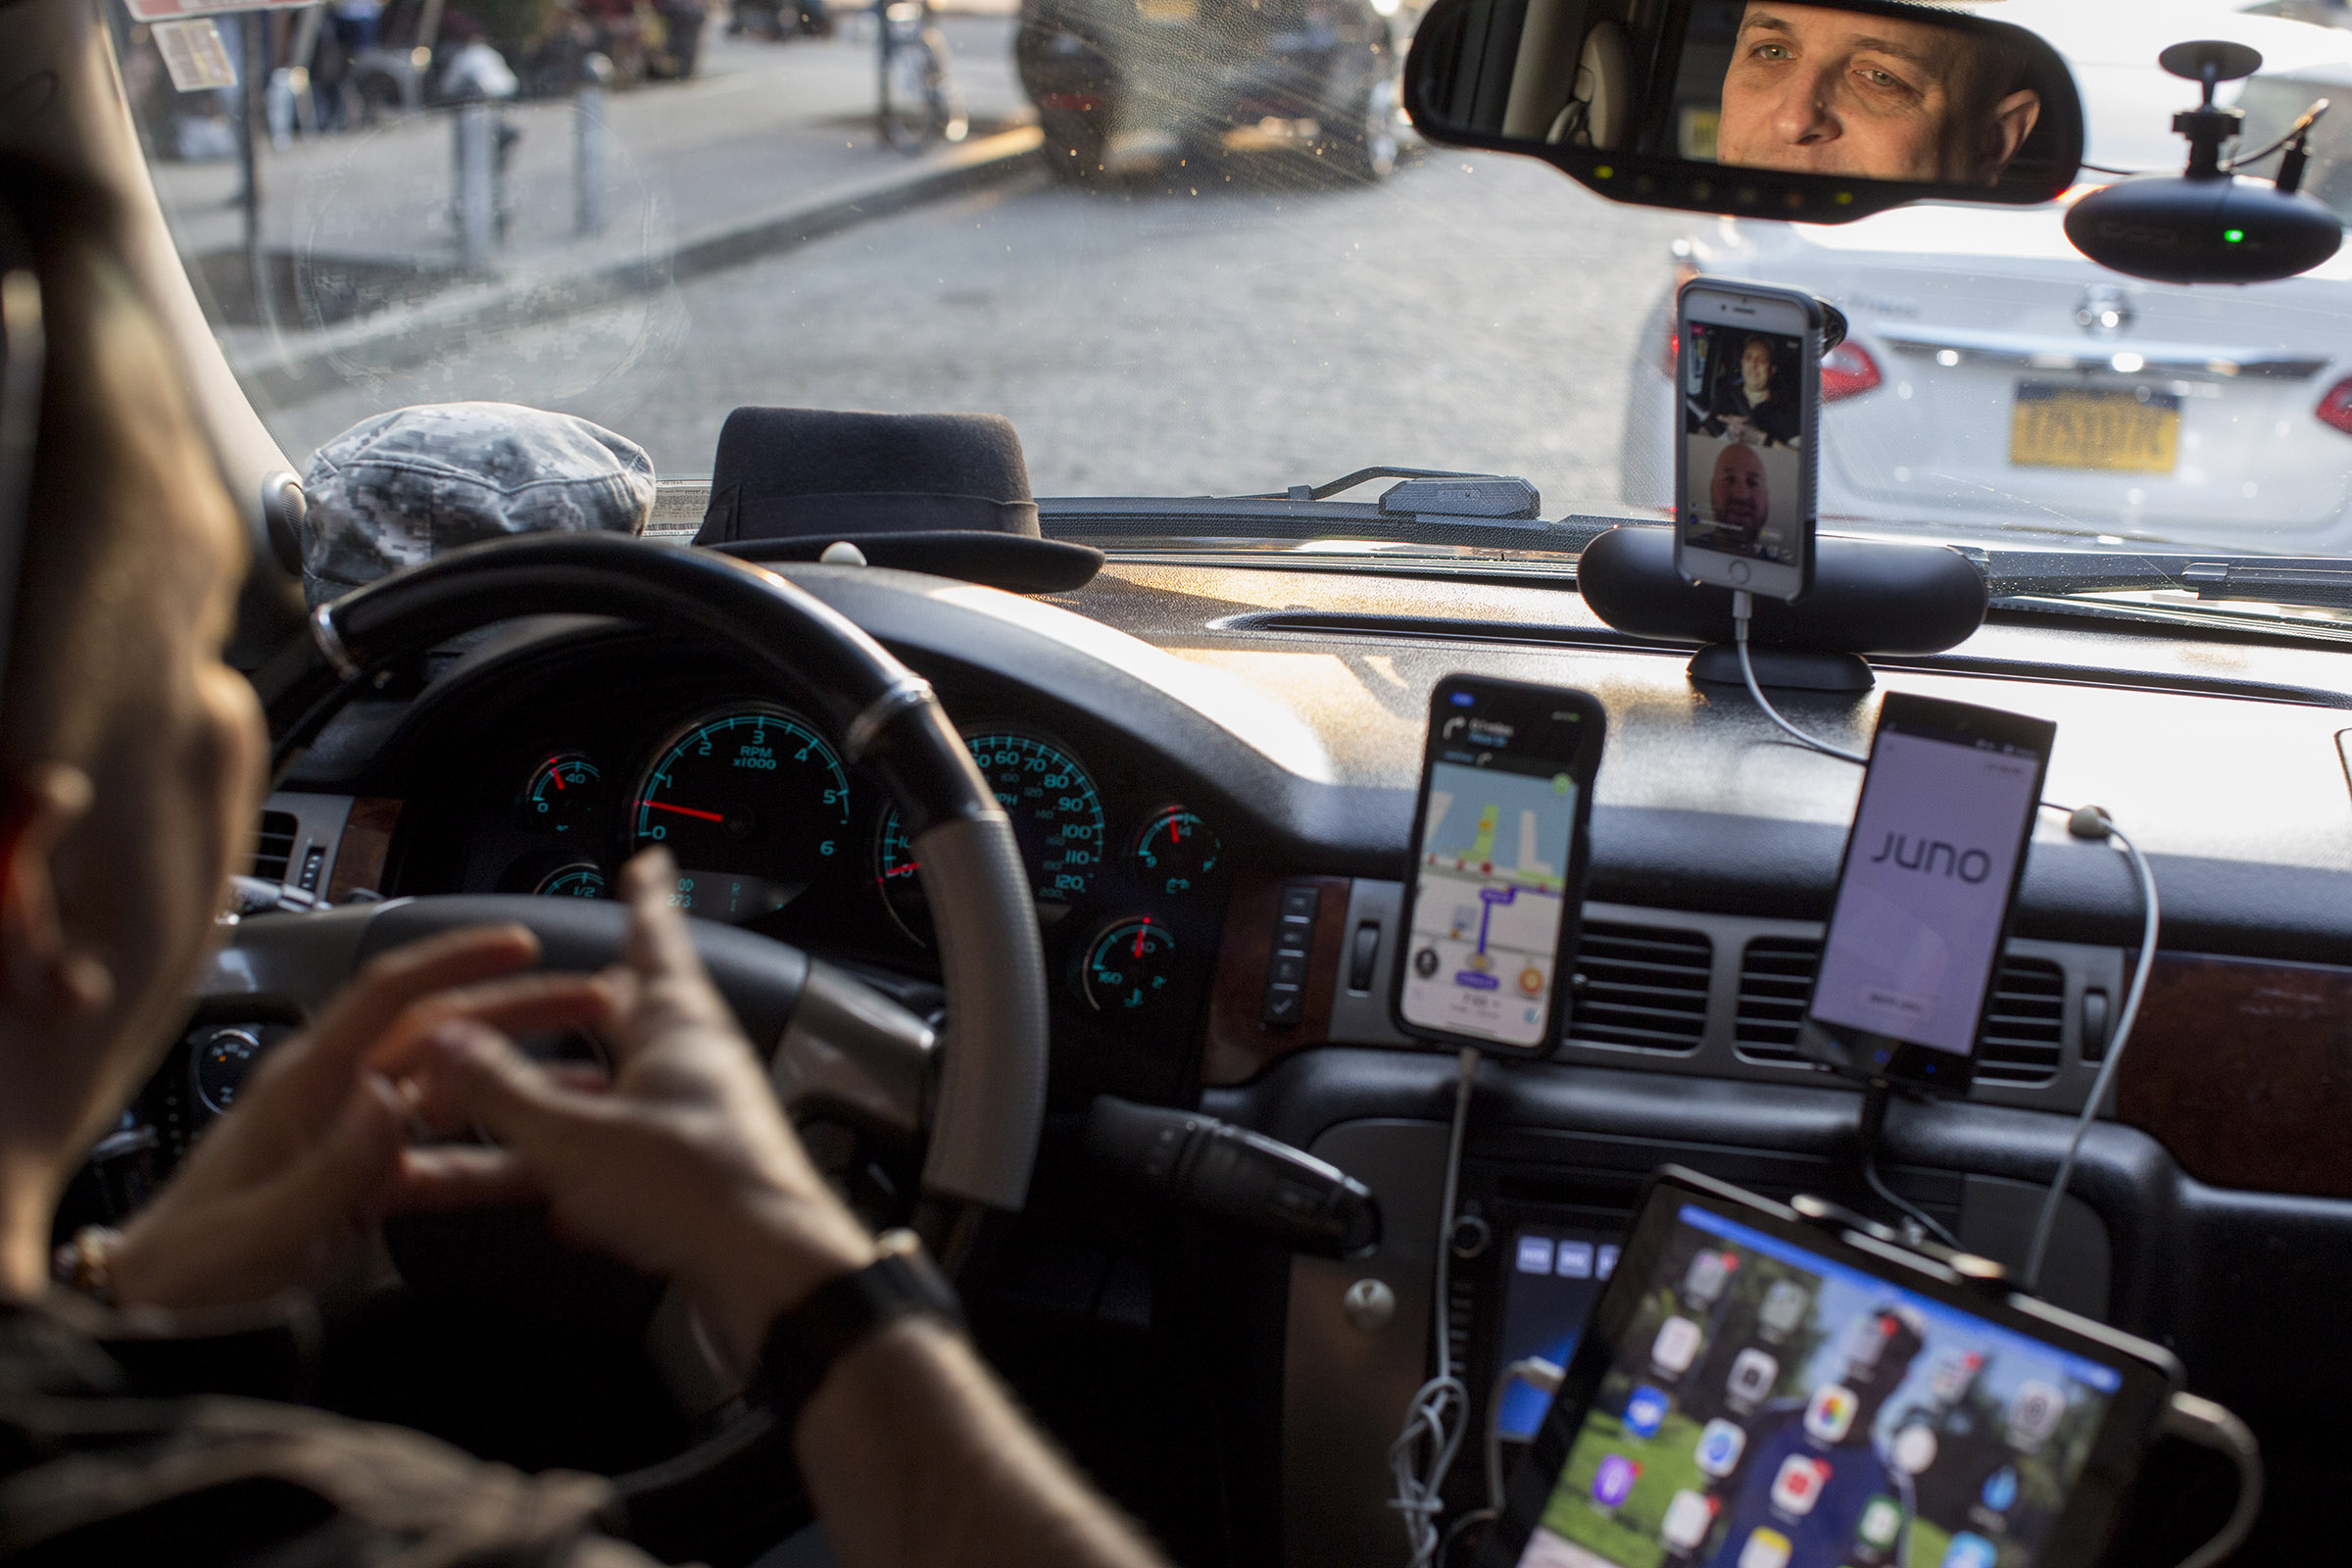 A driver for multiple ride-share companies with several devices on at once in New York, June 7, 2018. (Dave Sanders/The New York Times)